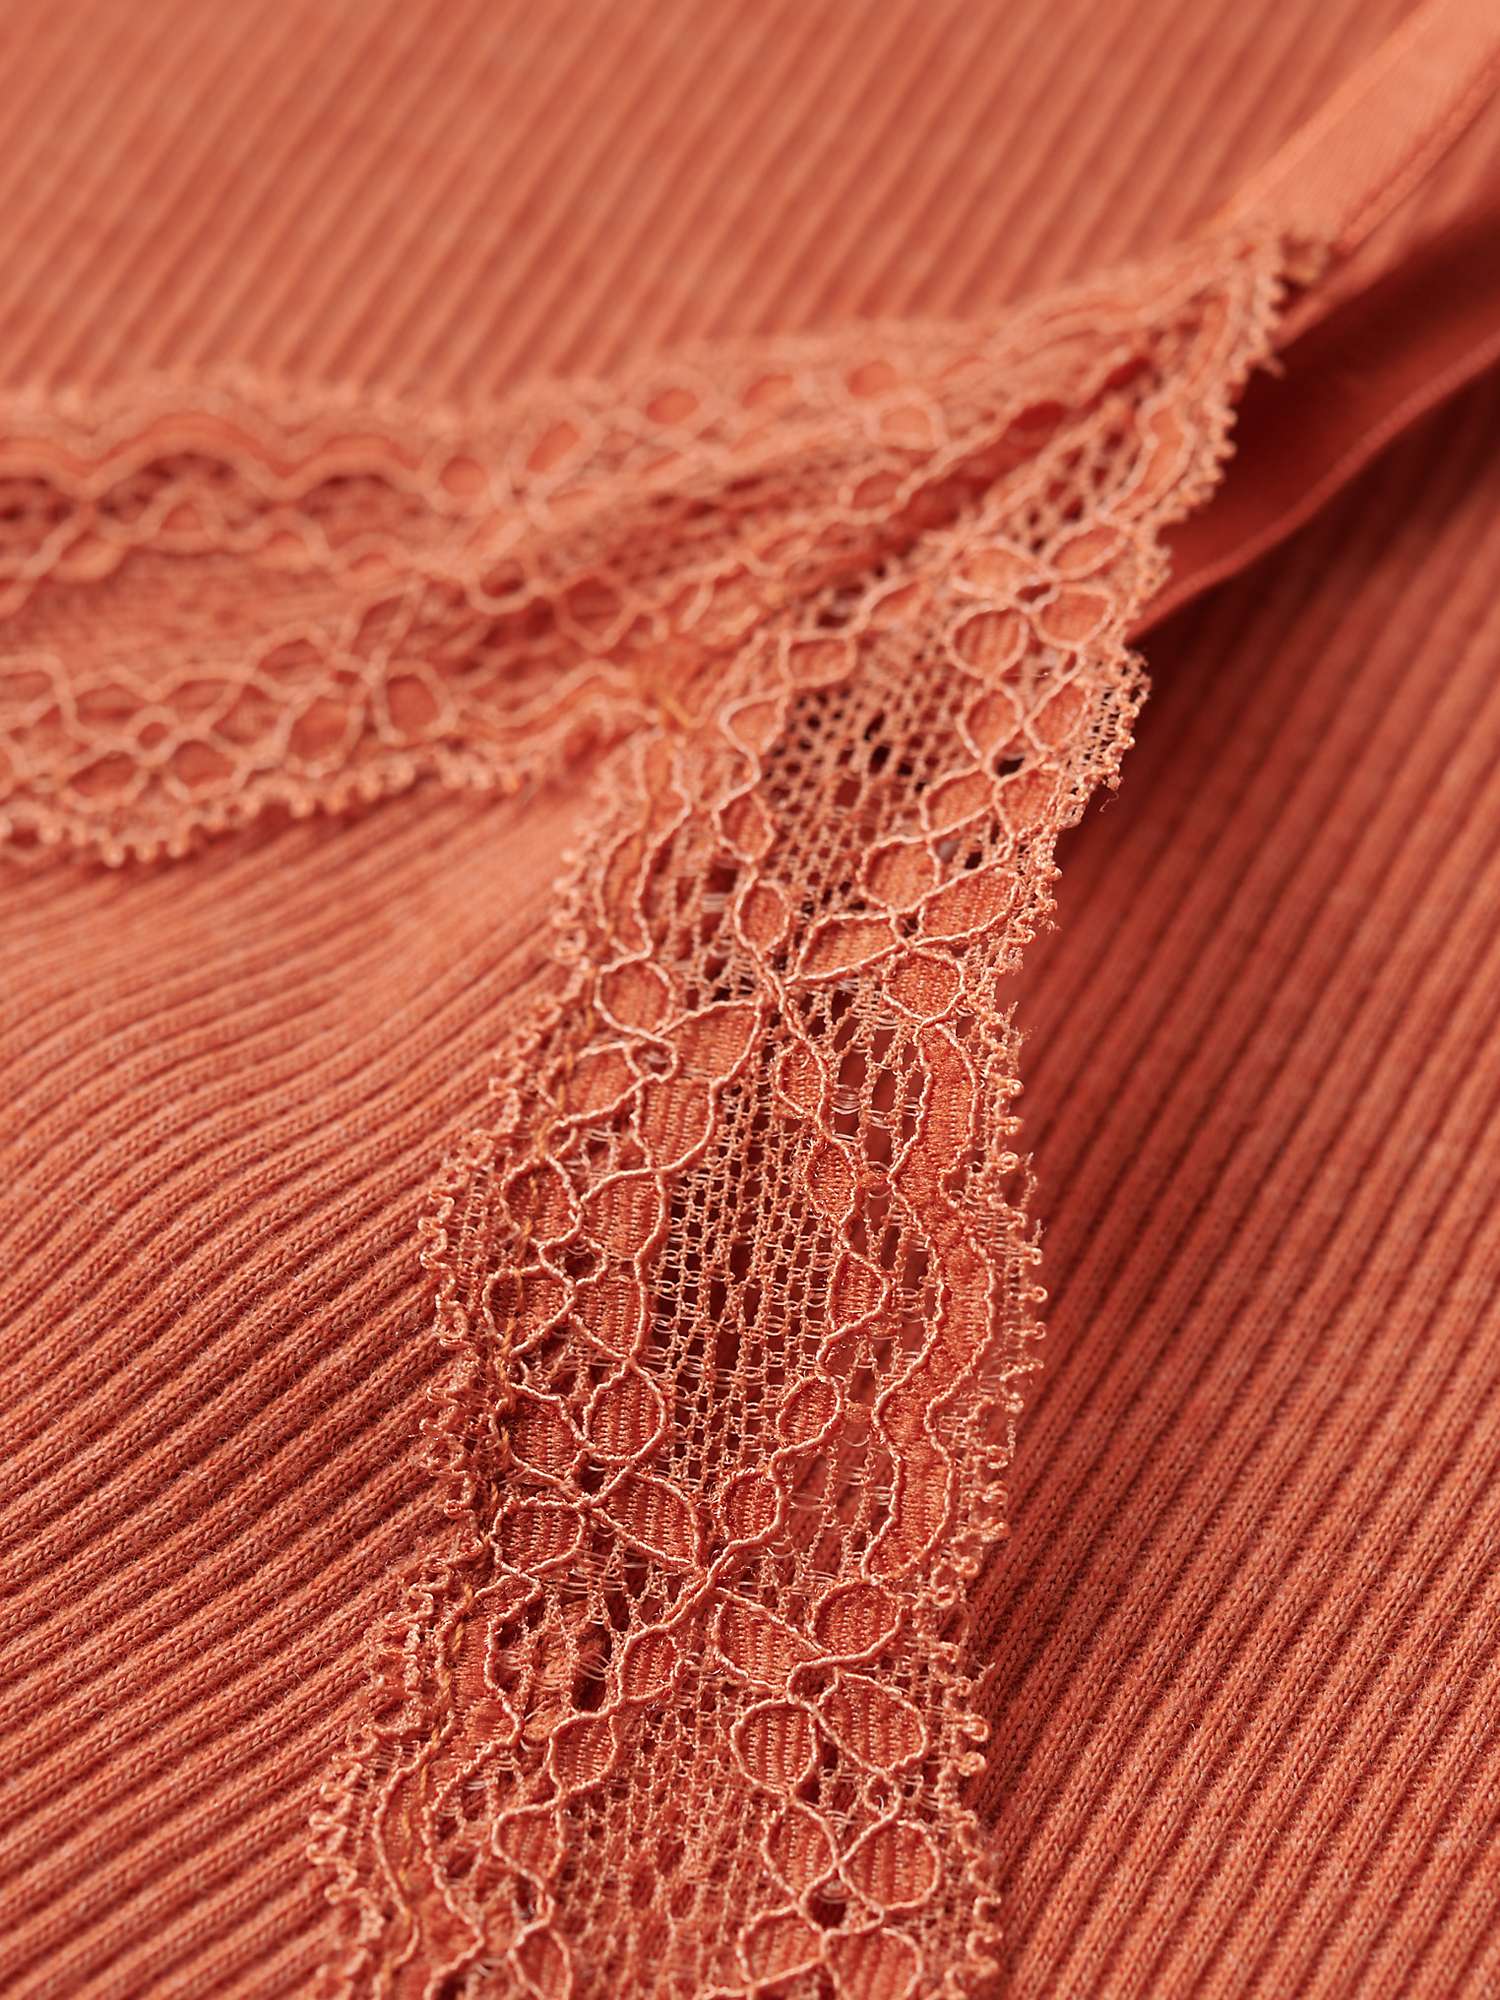 Buy Superdry Organic Cotton Vintage Rib Lace Cami Top Online at johnlewis.com